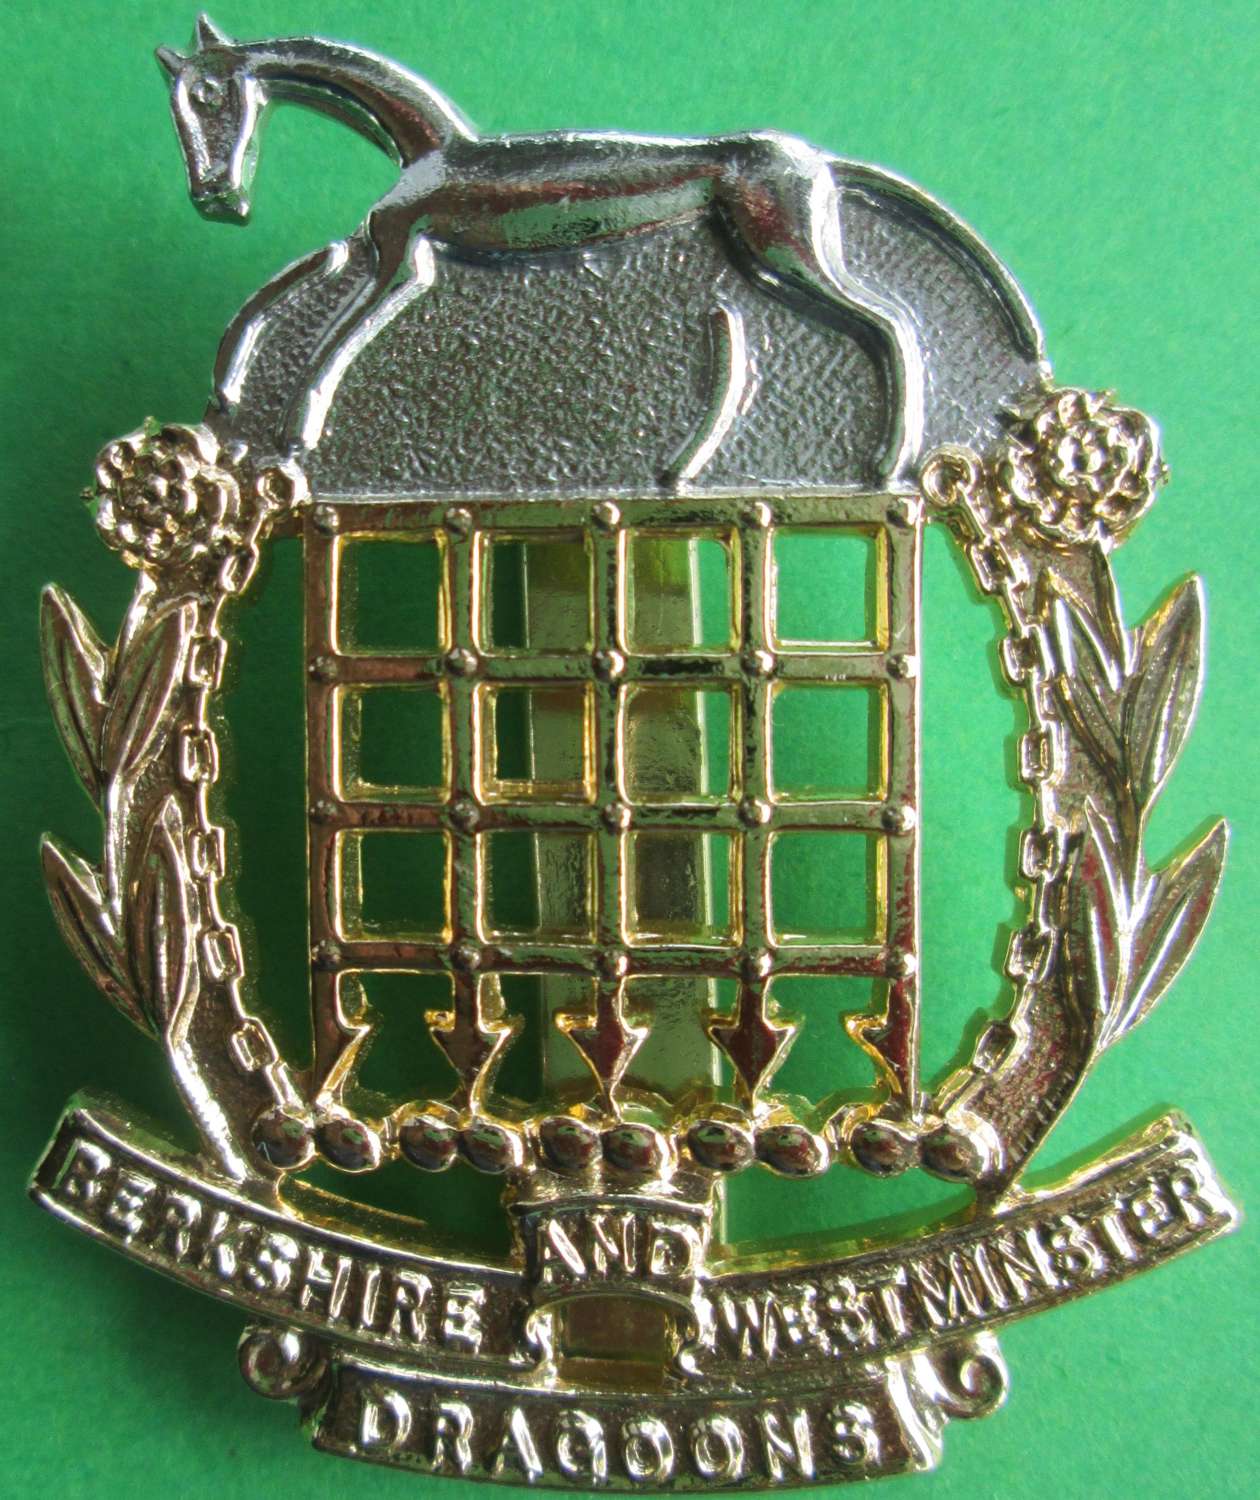 A BERKSHIRE AND WESTMINSTER DRAGOONS STAY BRIGHT CAP BADGE